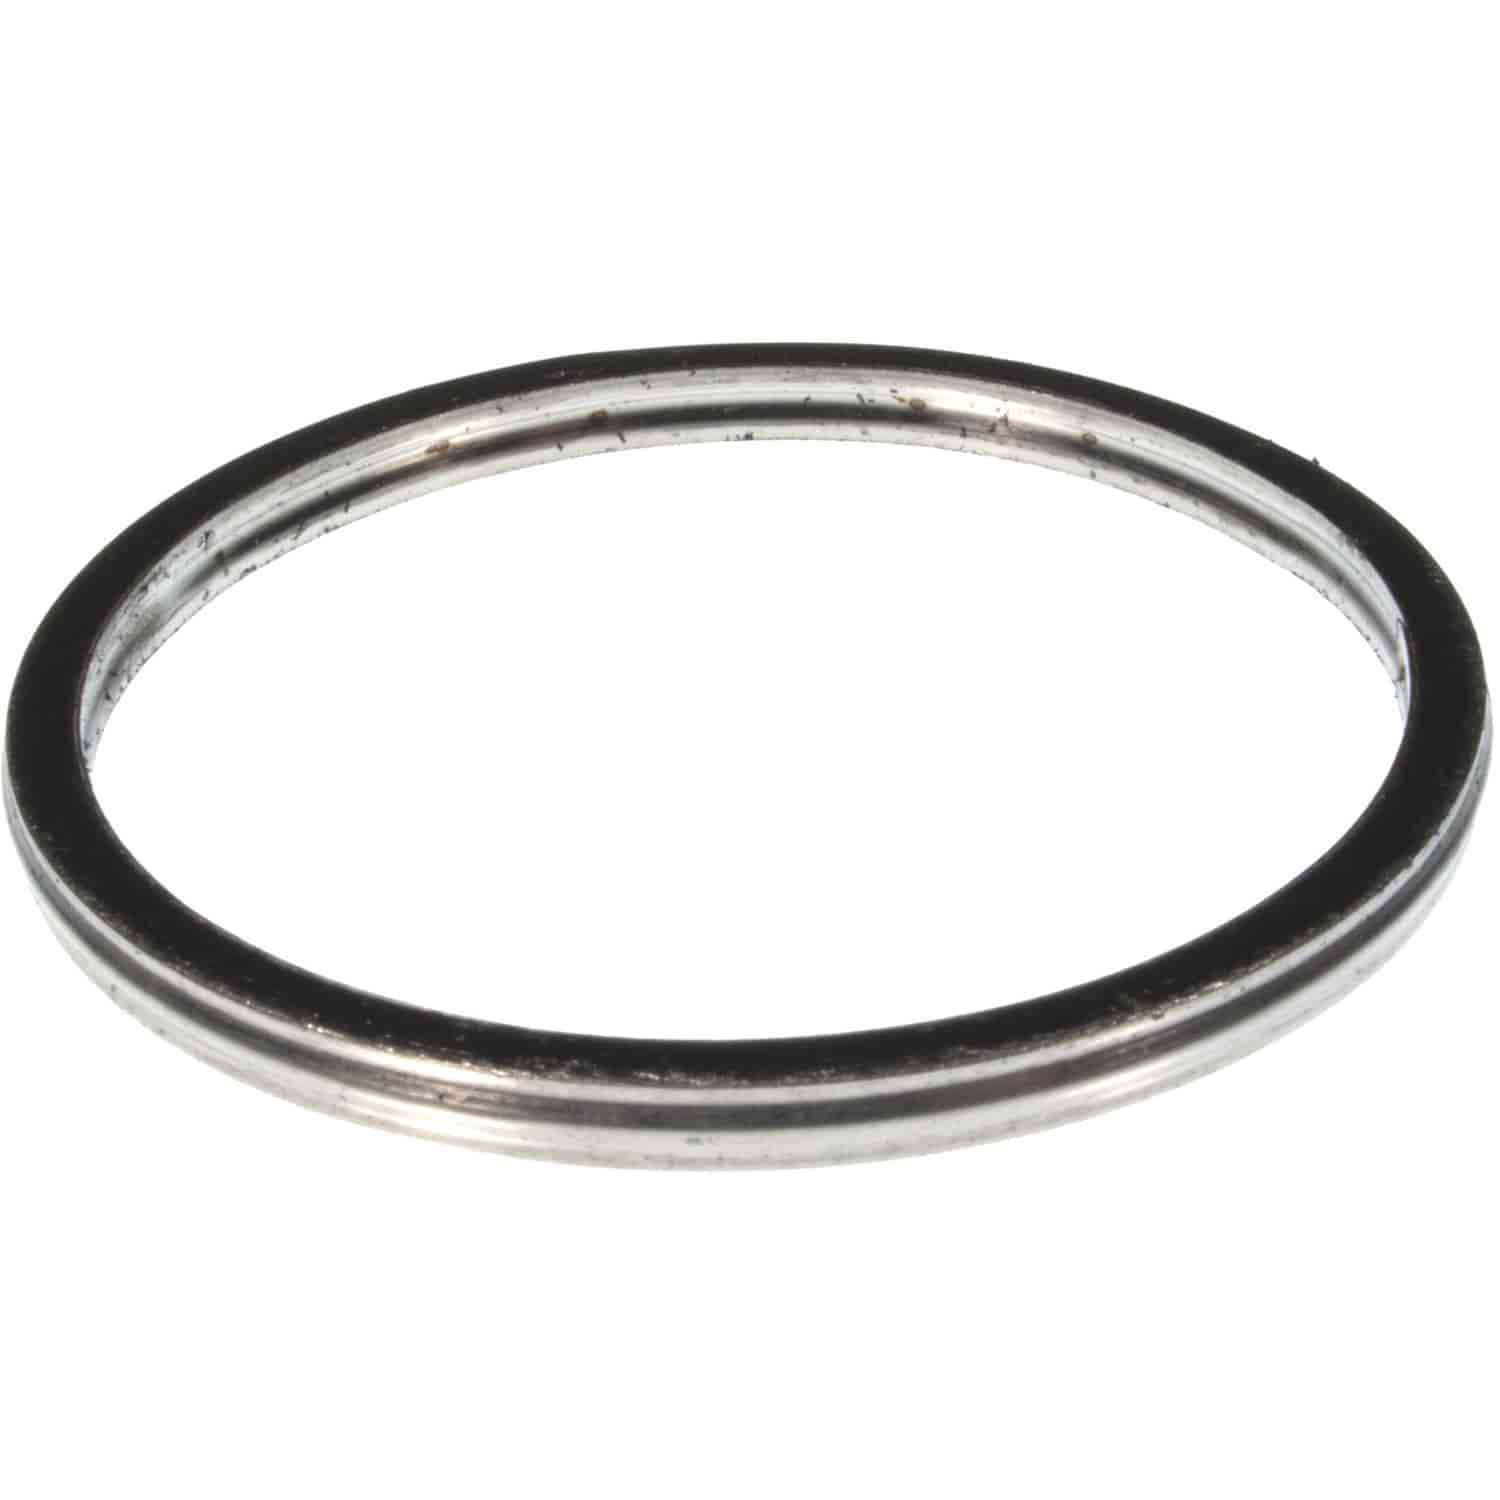 Exhaust Pipe Packing Ring GM 3.6L High Feature Vin 7 2007-2008 Outlook Acadia Enclave 2009 Vin D